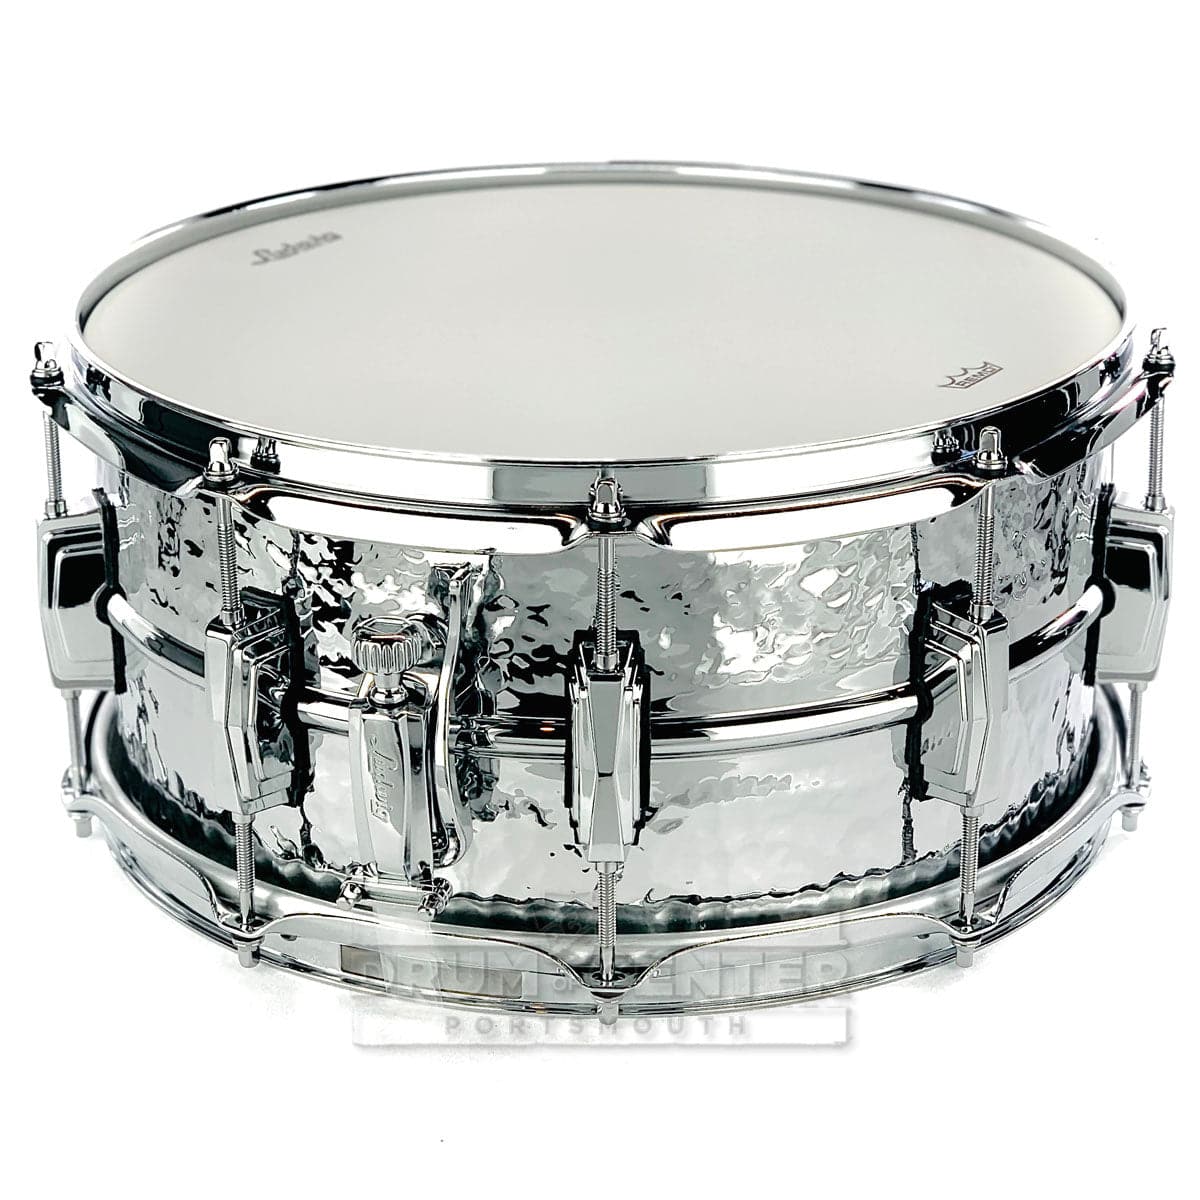 Ludwig Supraphonic Hammered Snare Drum 14x6.5 B-Stock